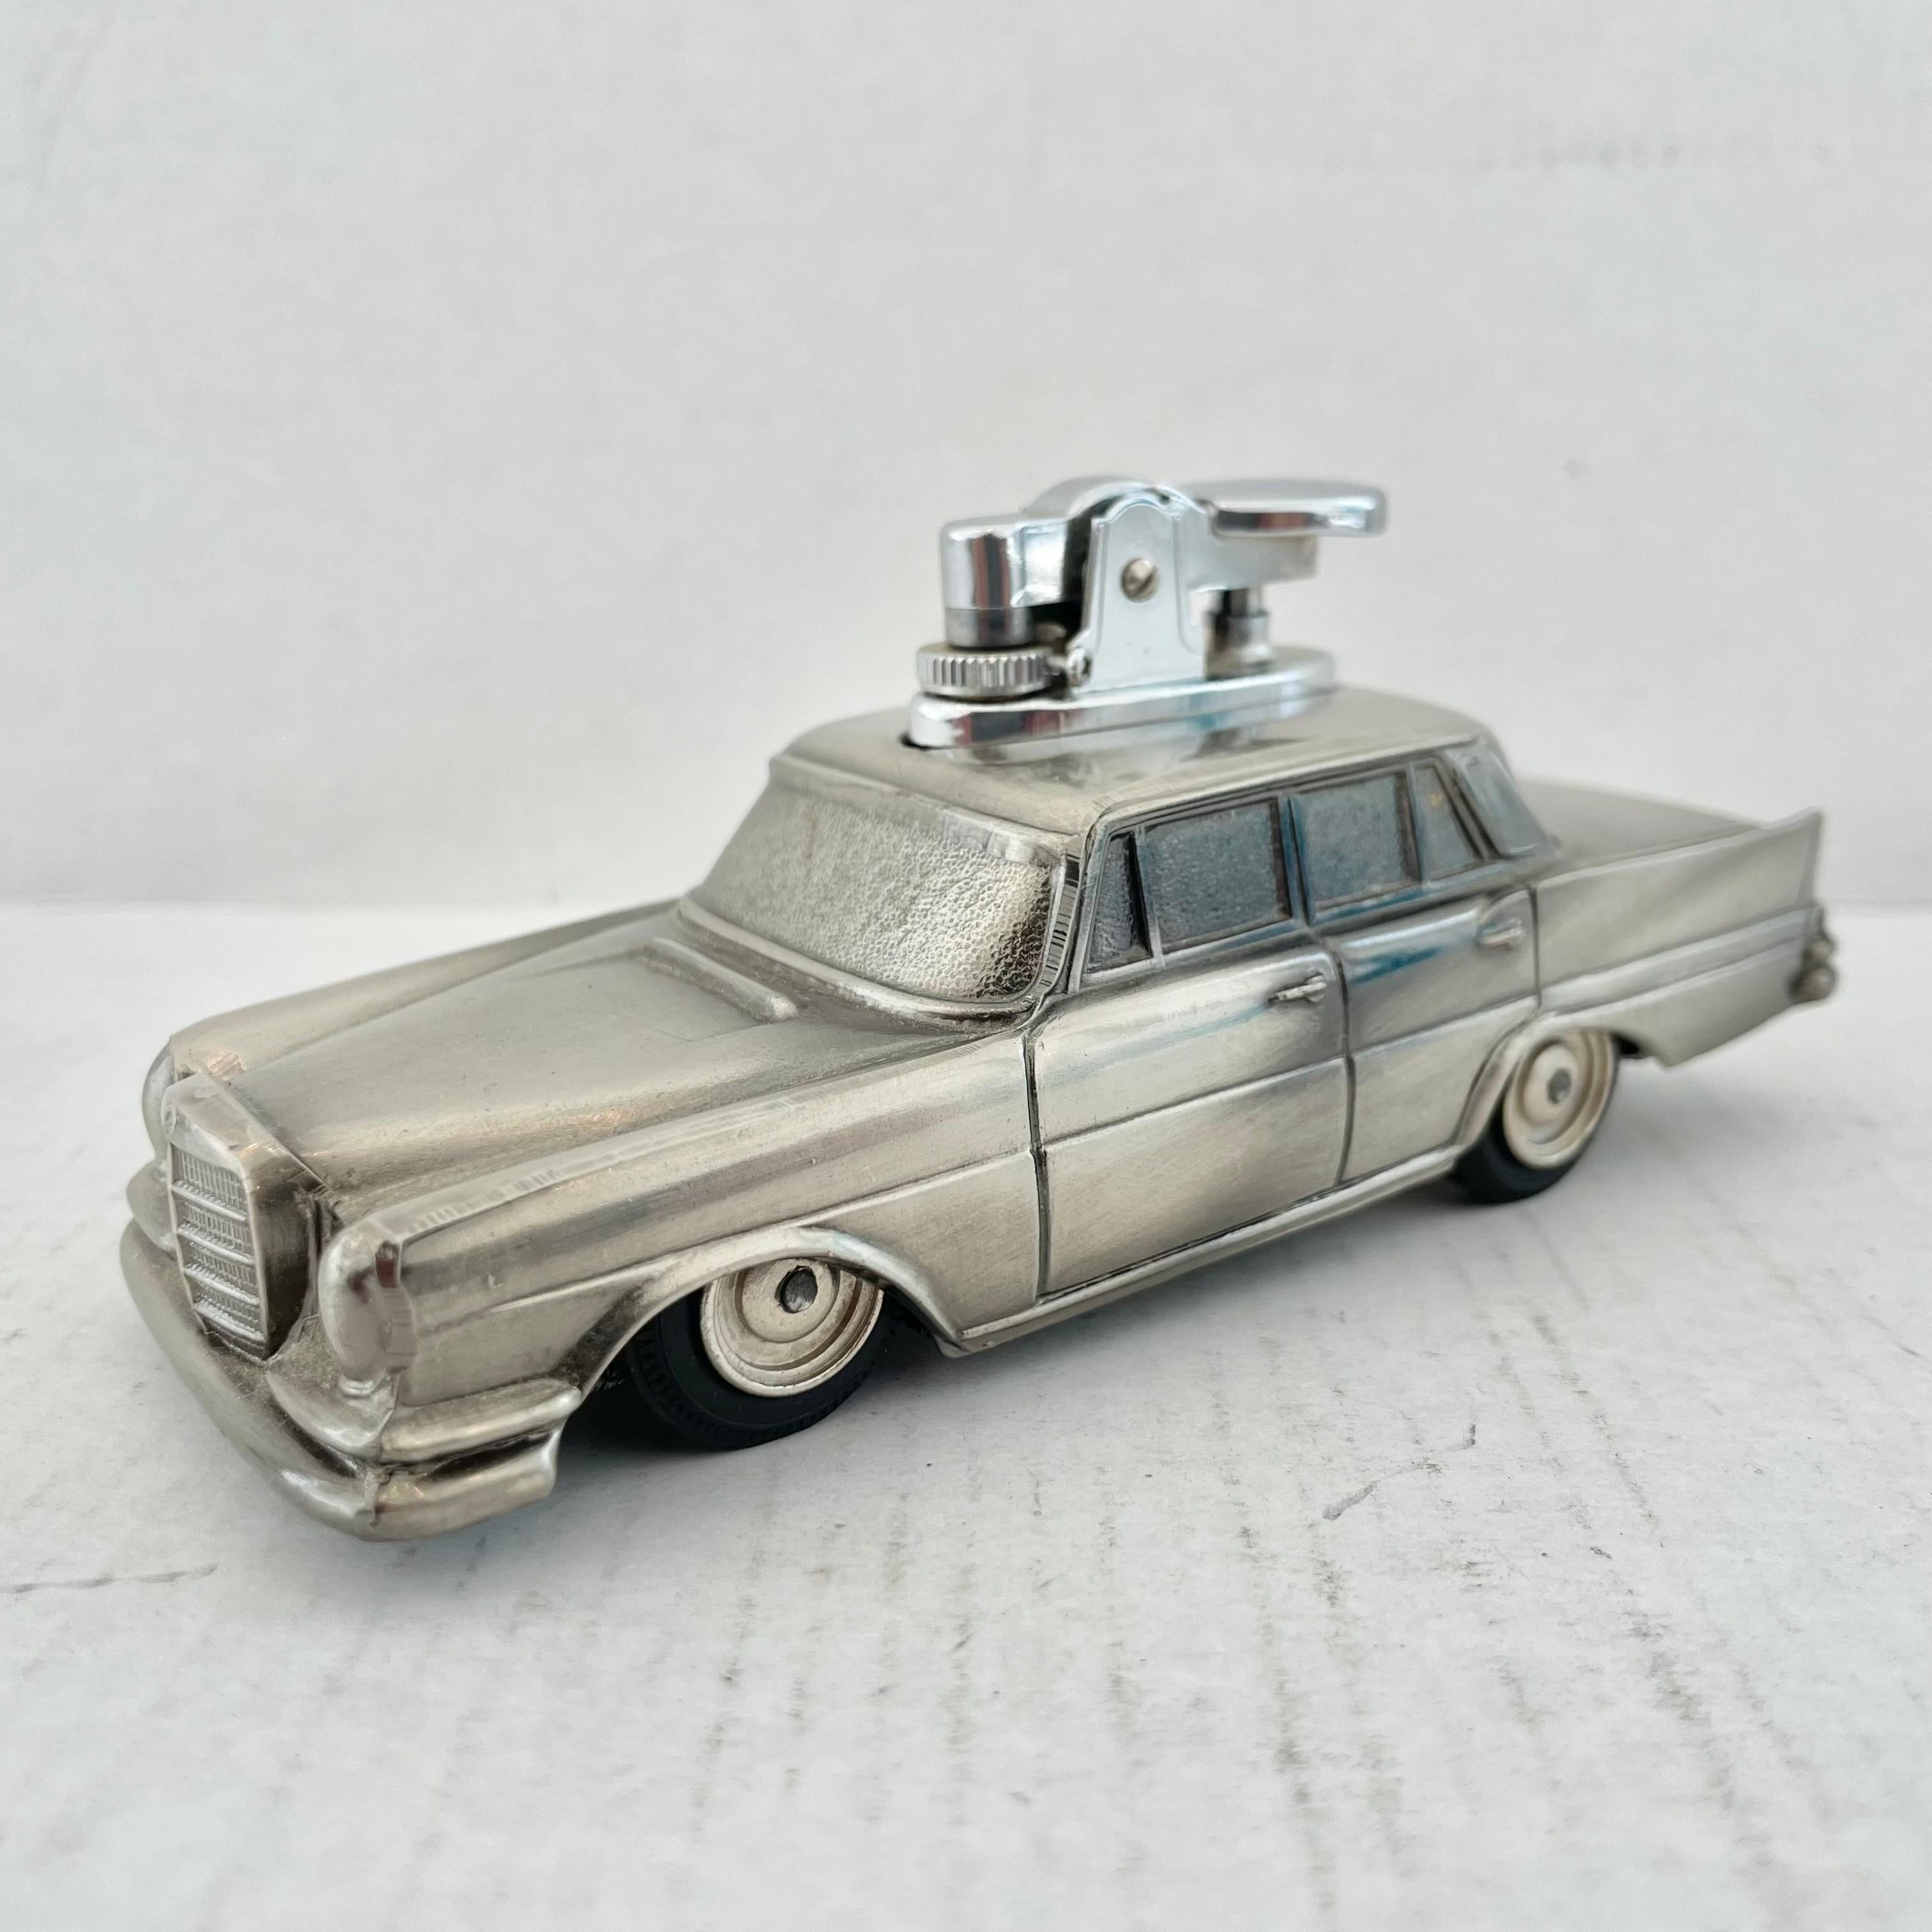 Cool vintage table lighter in the shape of a Mercedes Benz sedan. Made in Japan, 1980s. This piece has great balance and details like rubber wheels that roll. Mercedes logo on the front and back and a 'Made In Japan' sticker on the underside as well